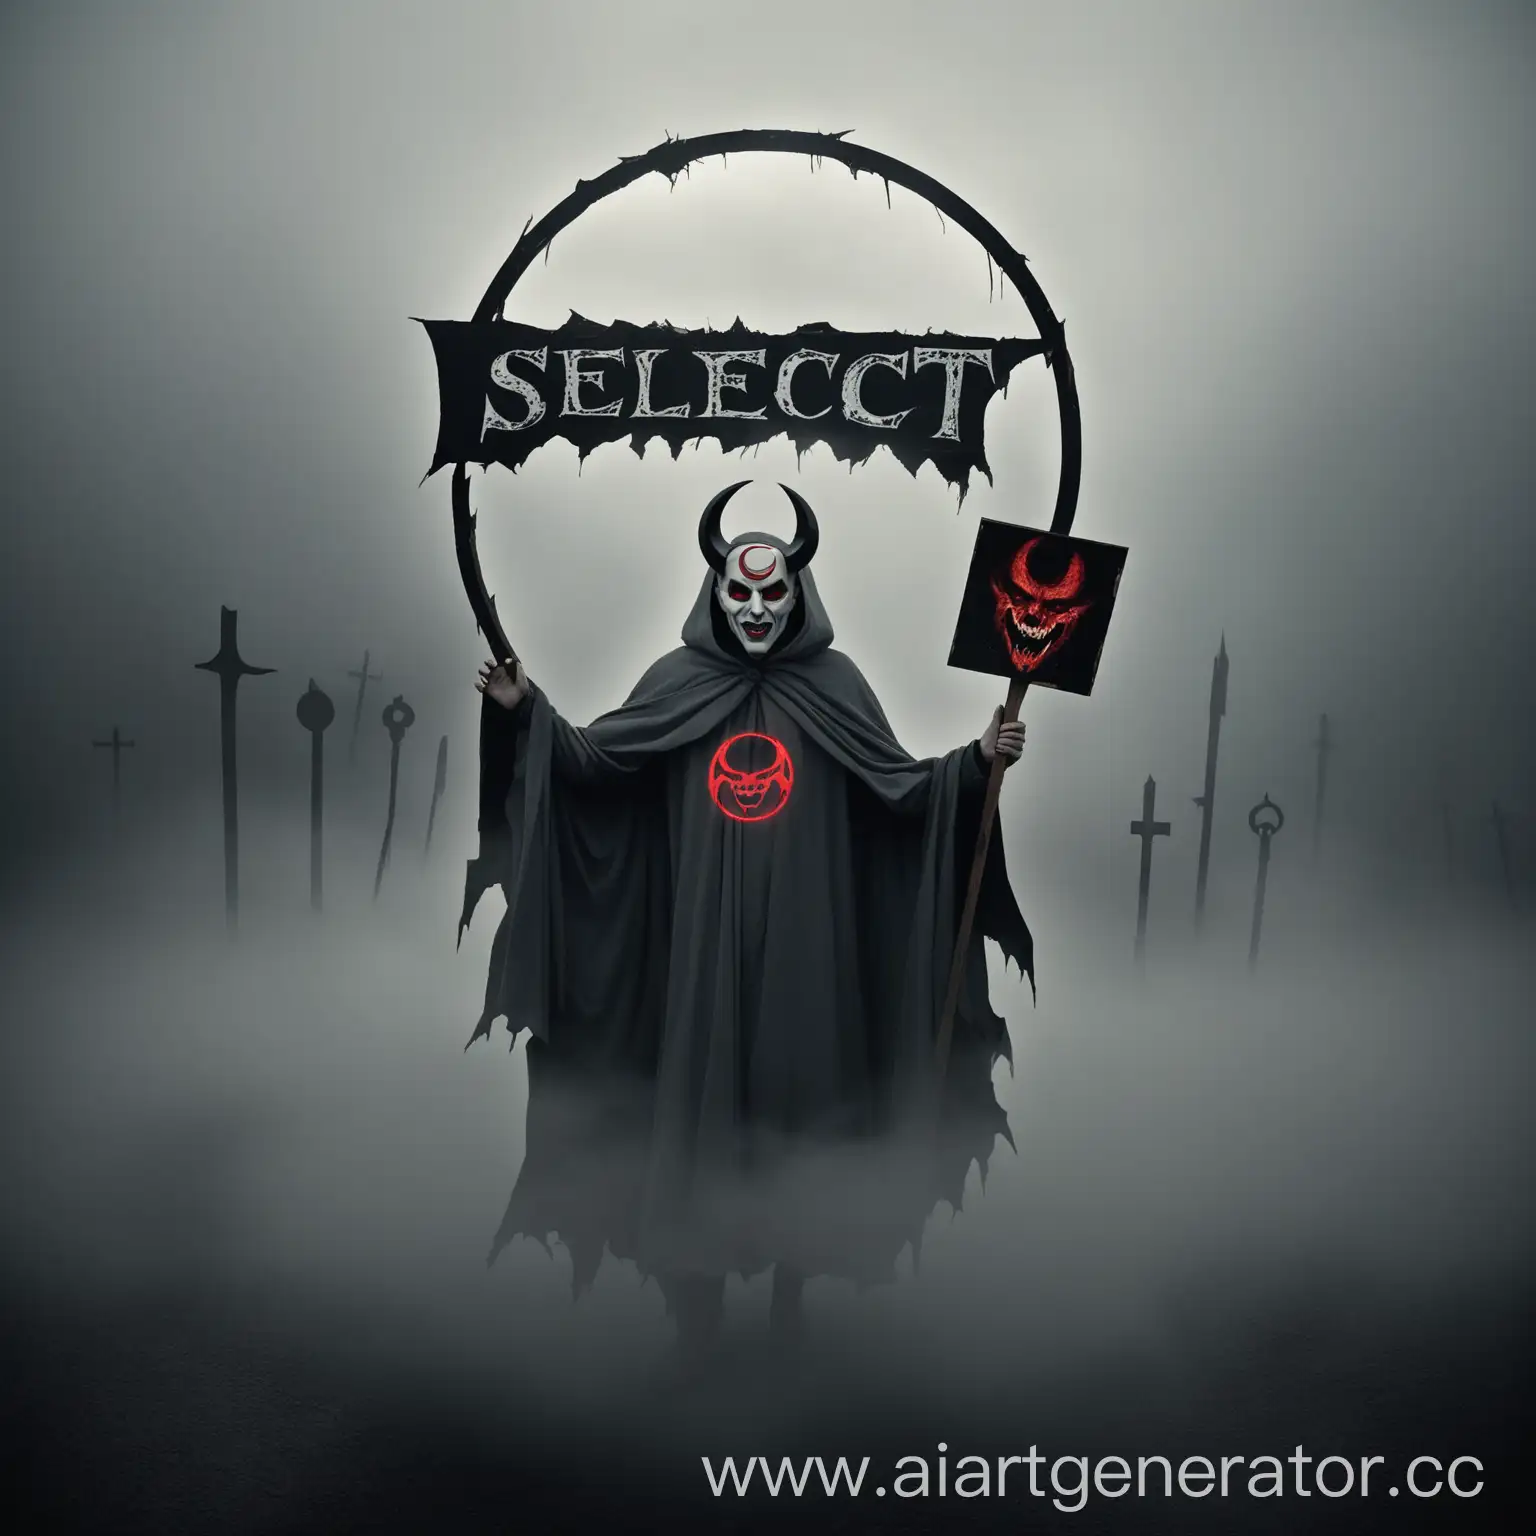 Mysterious-Figure-in-Oval-Satan-Mask-Holding-SELECT-Sign-in-Gray-Fog